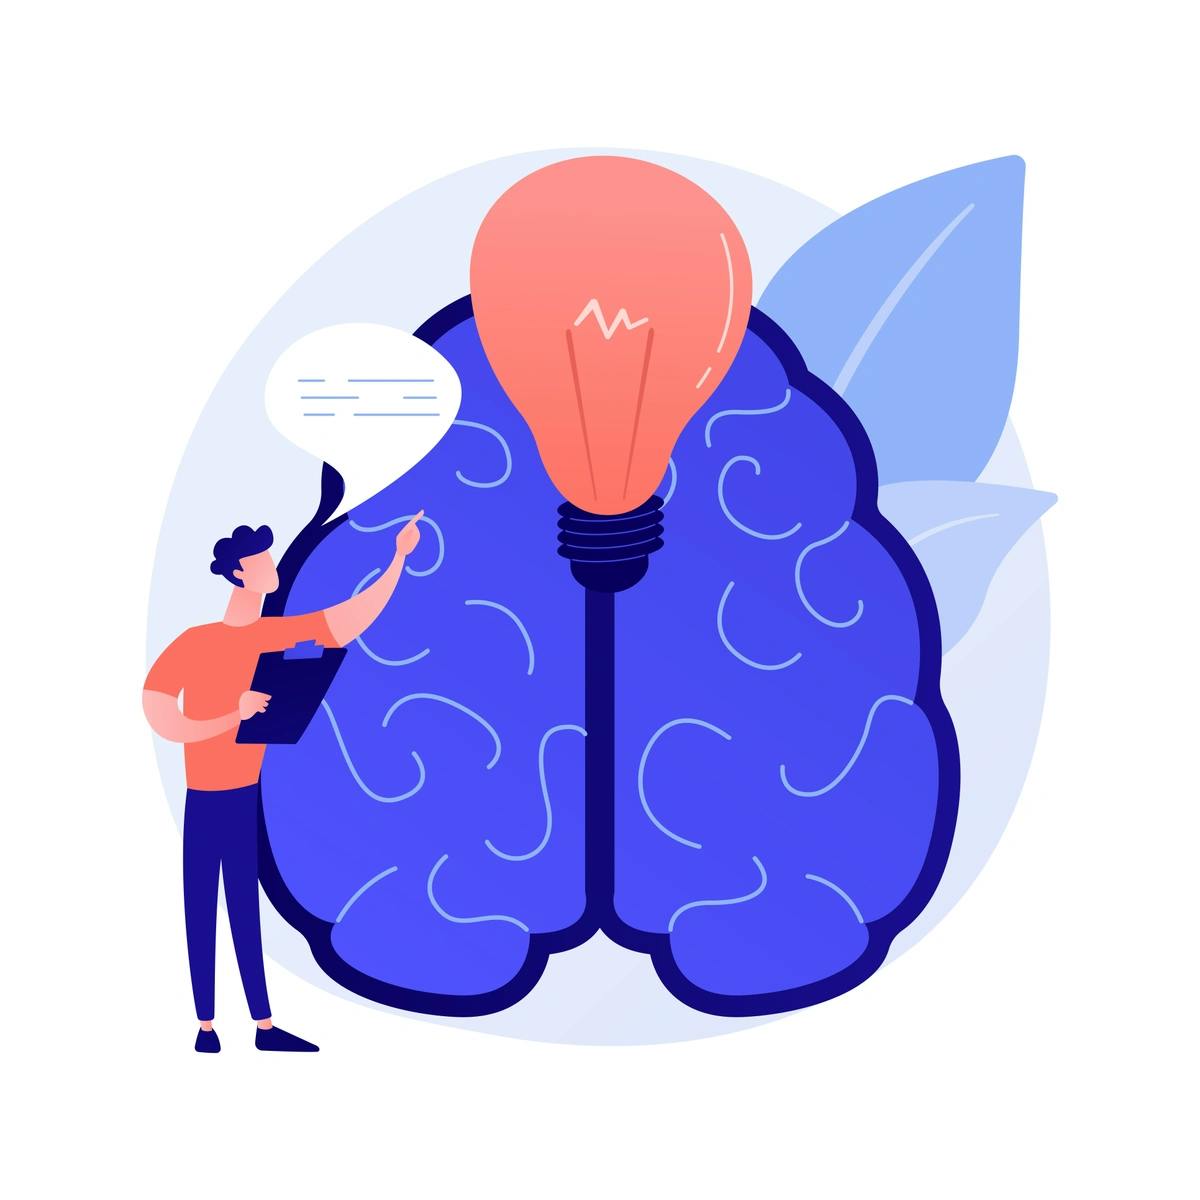 A graphic of a person pointing at a light bulb integrated with a brain, symbolizing smart ideas or intelligence.